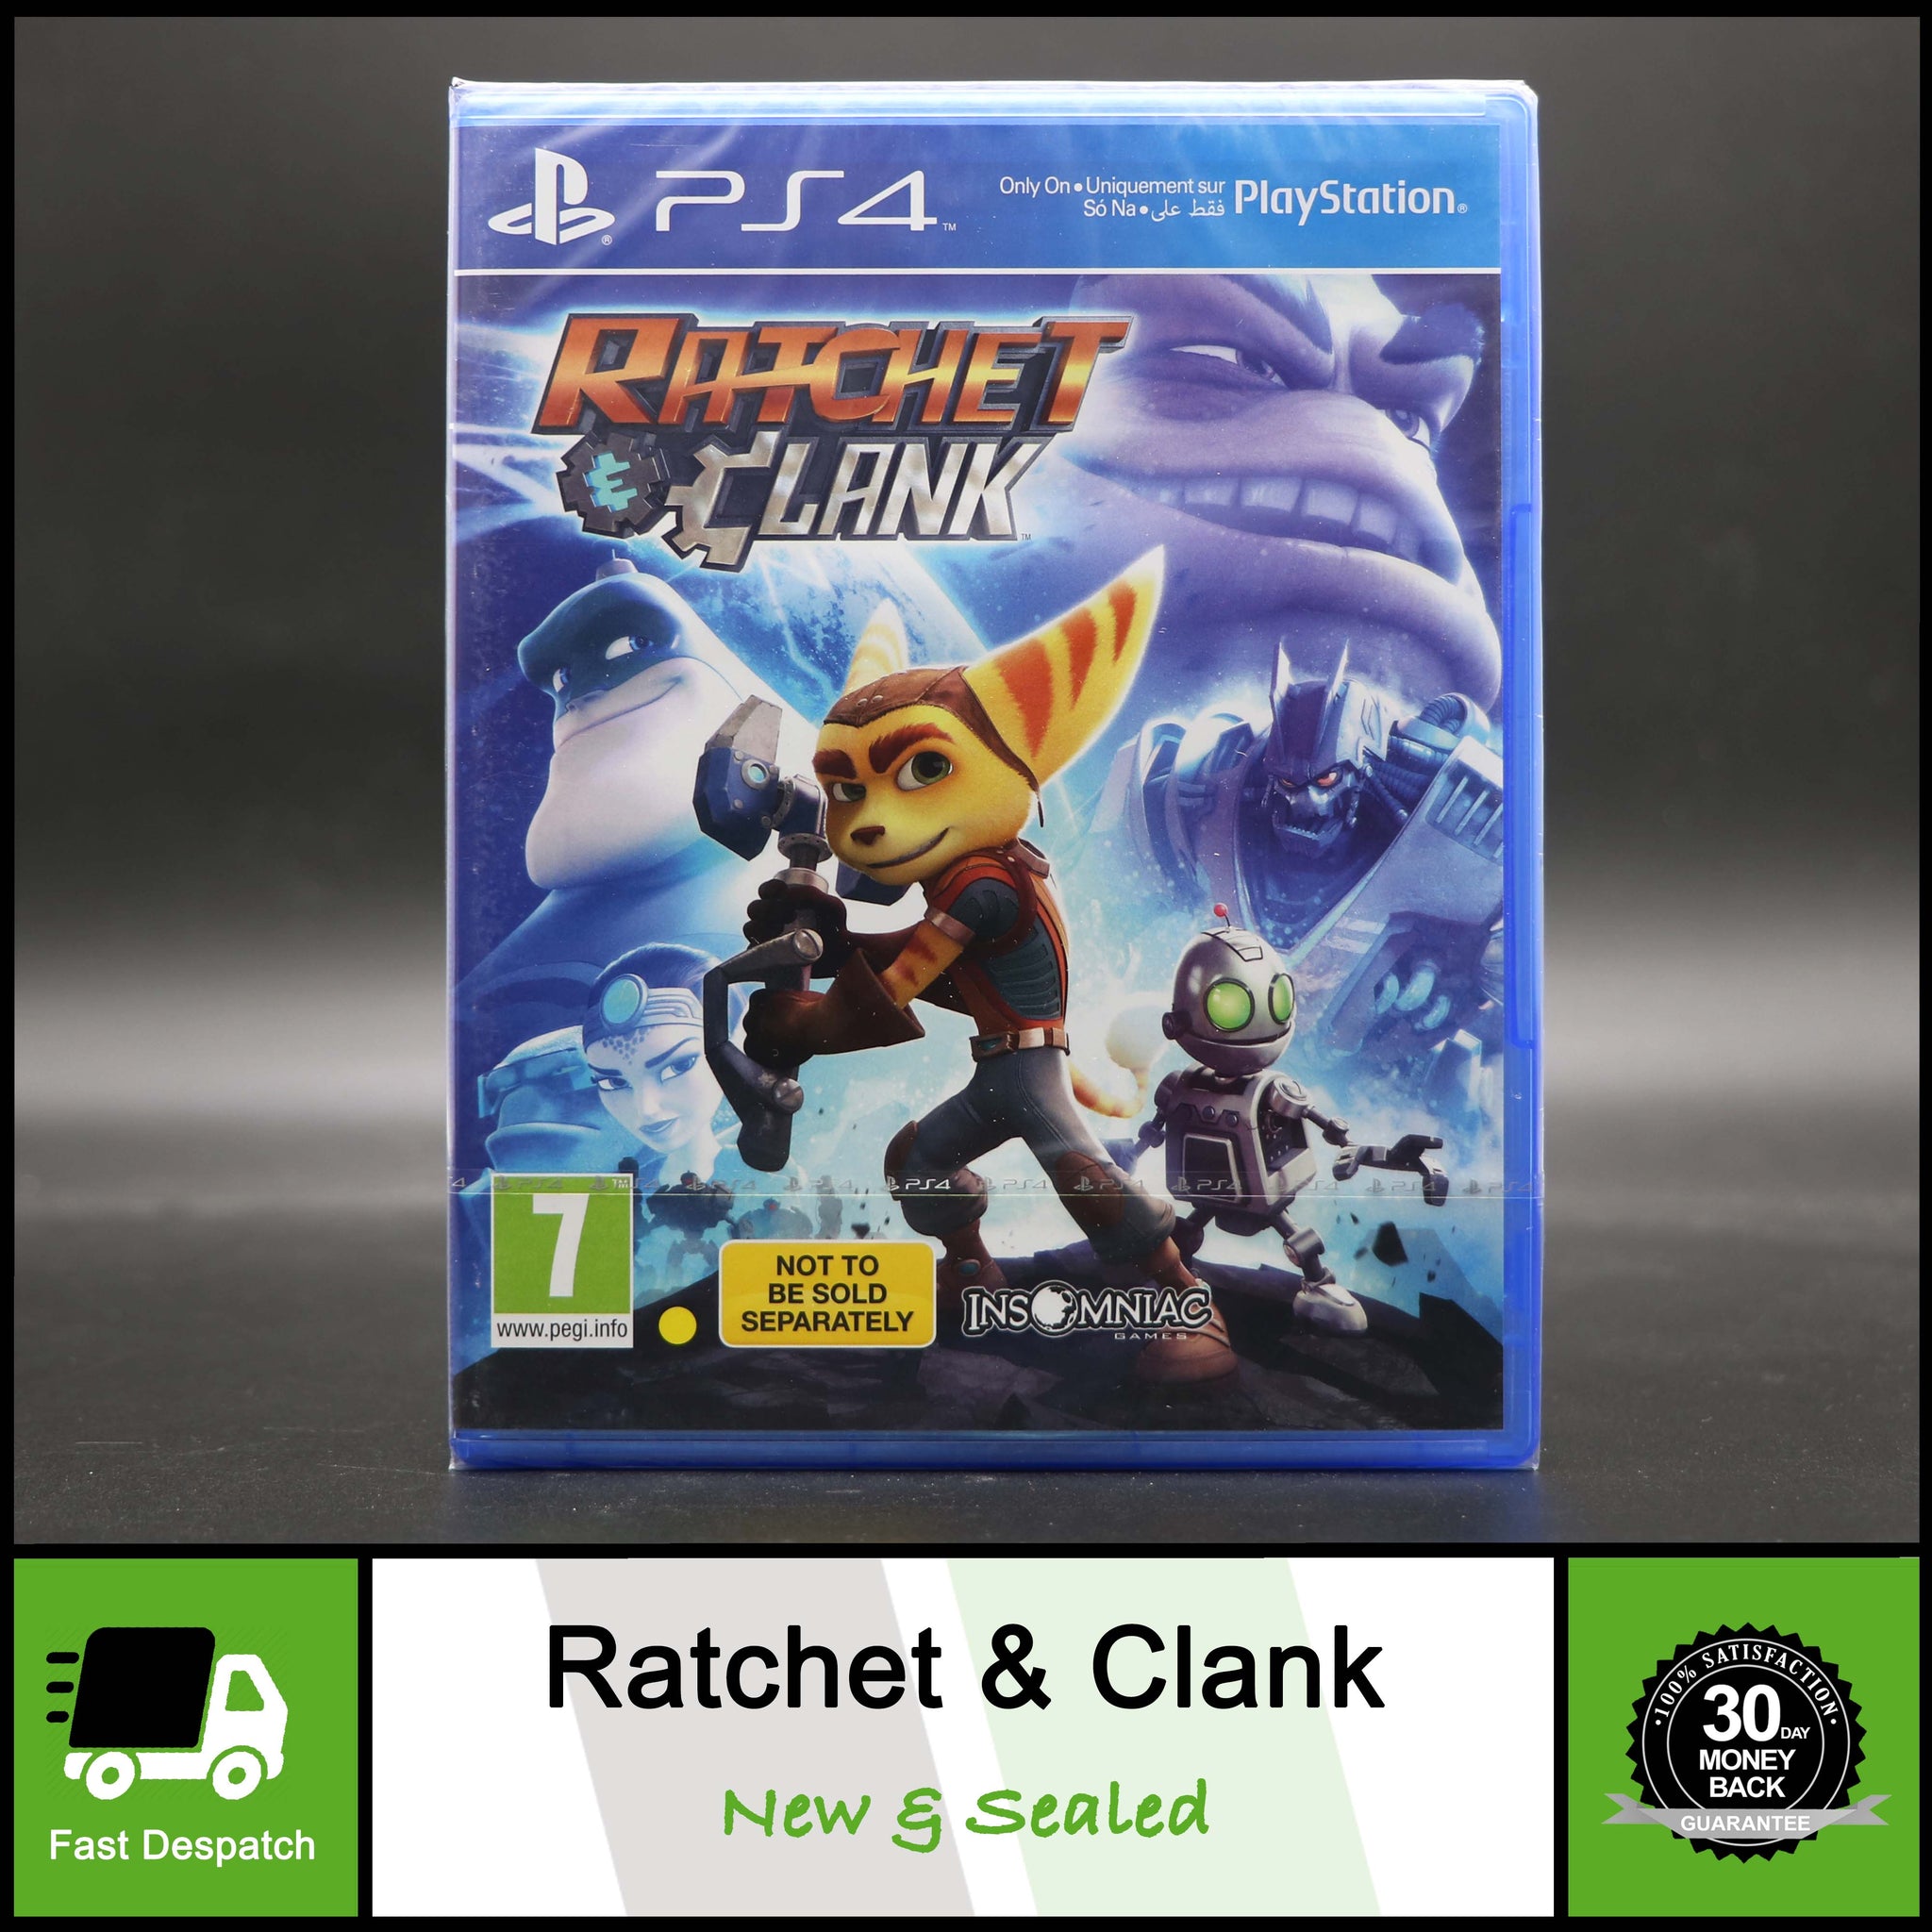 Ratchet & Clank for PlayStation 4